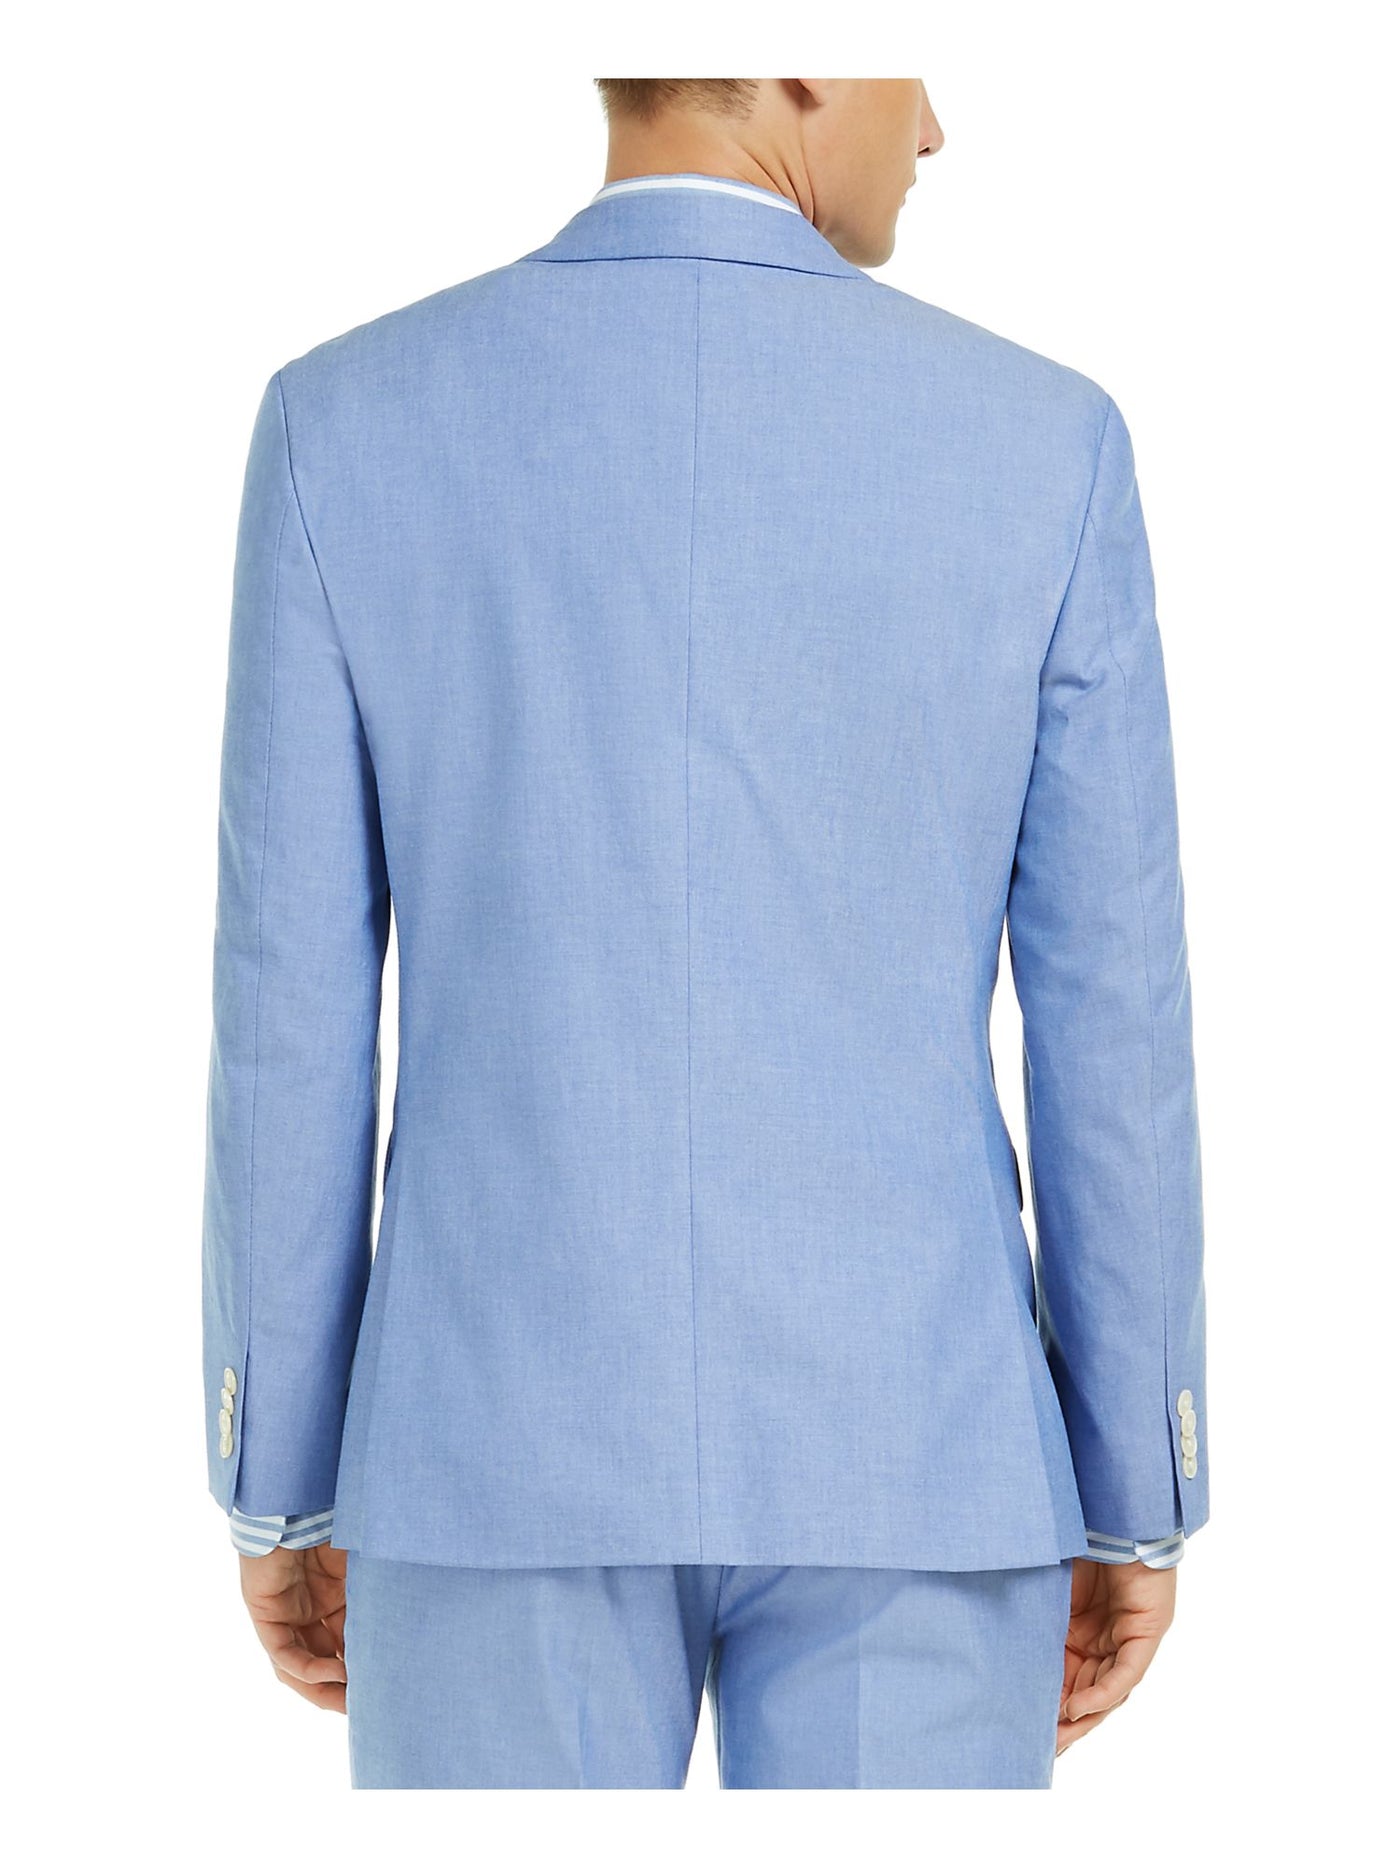 TOMMY HILFIGER Mens Blue Single Breasted, Stretch, Regular Fit Chambray Suit Separate Blazer Jacket 46R